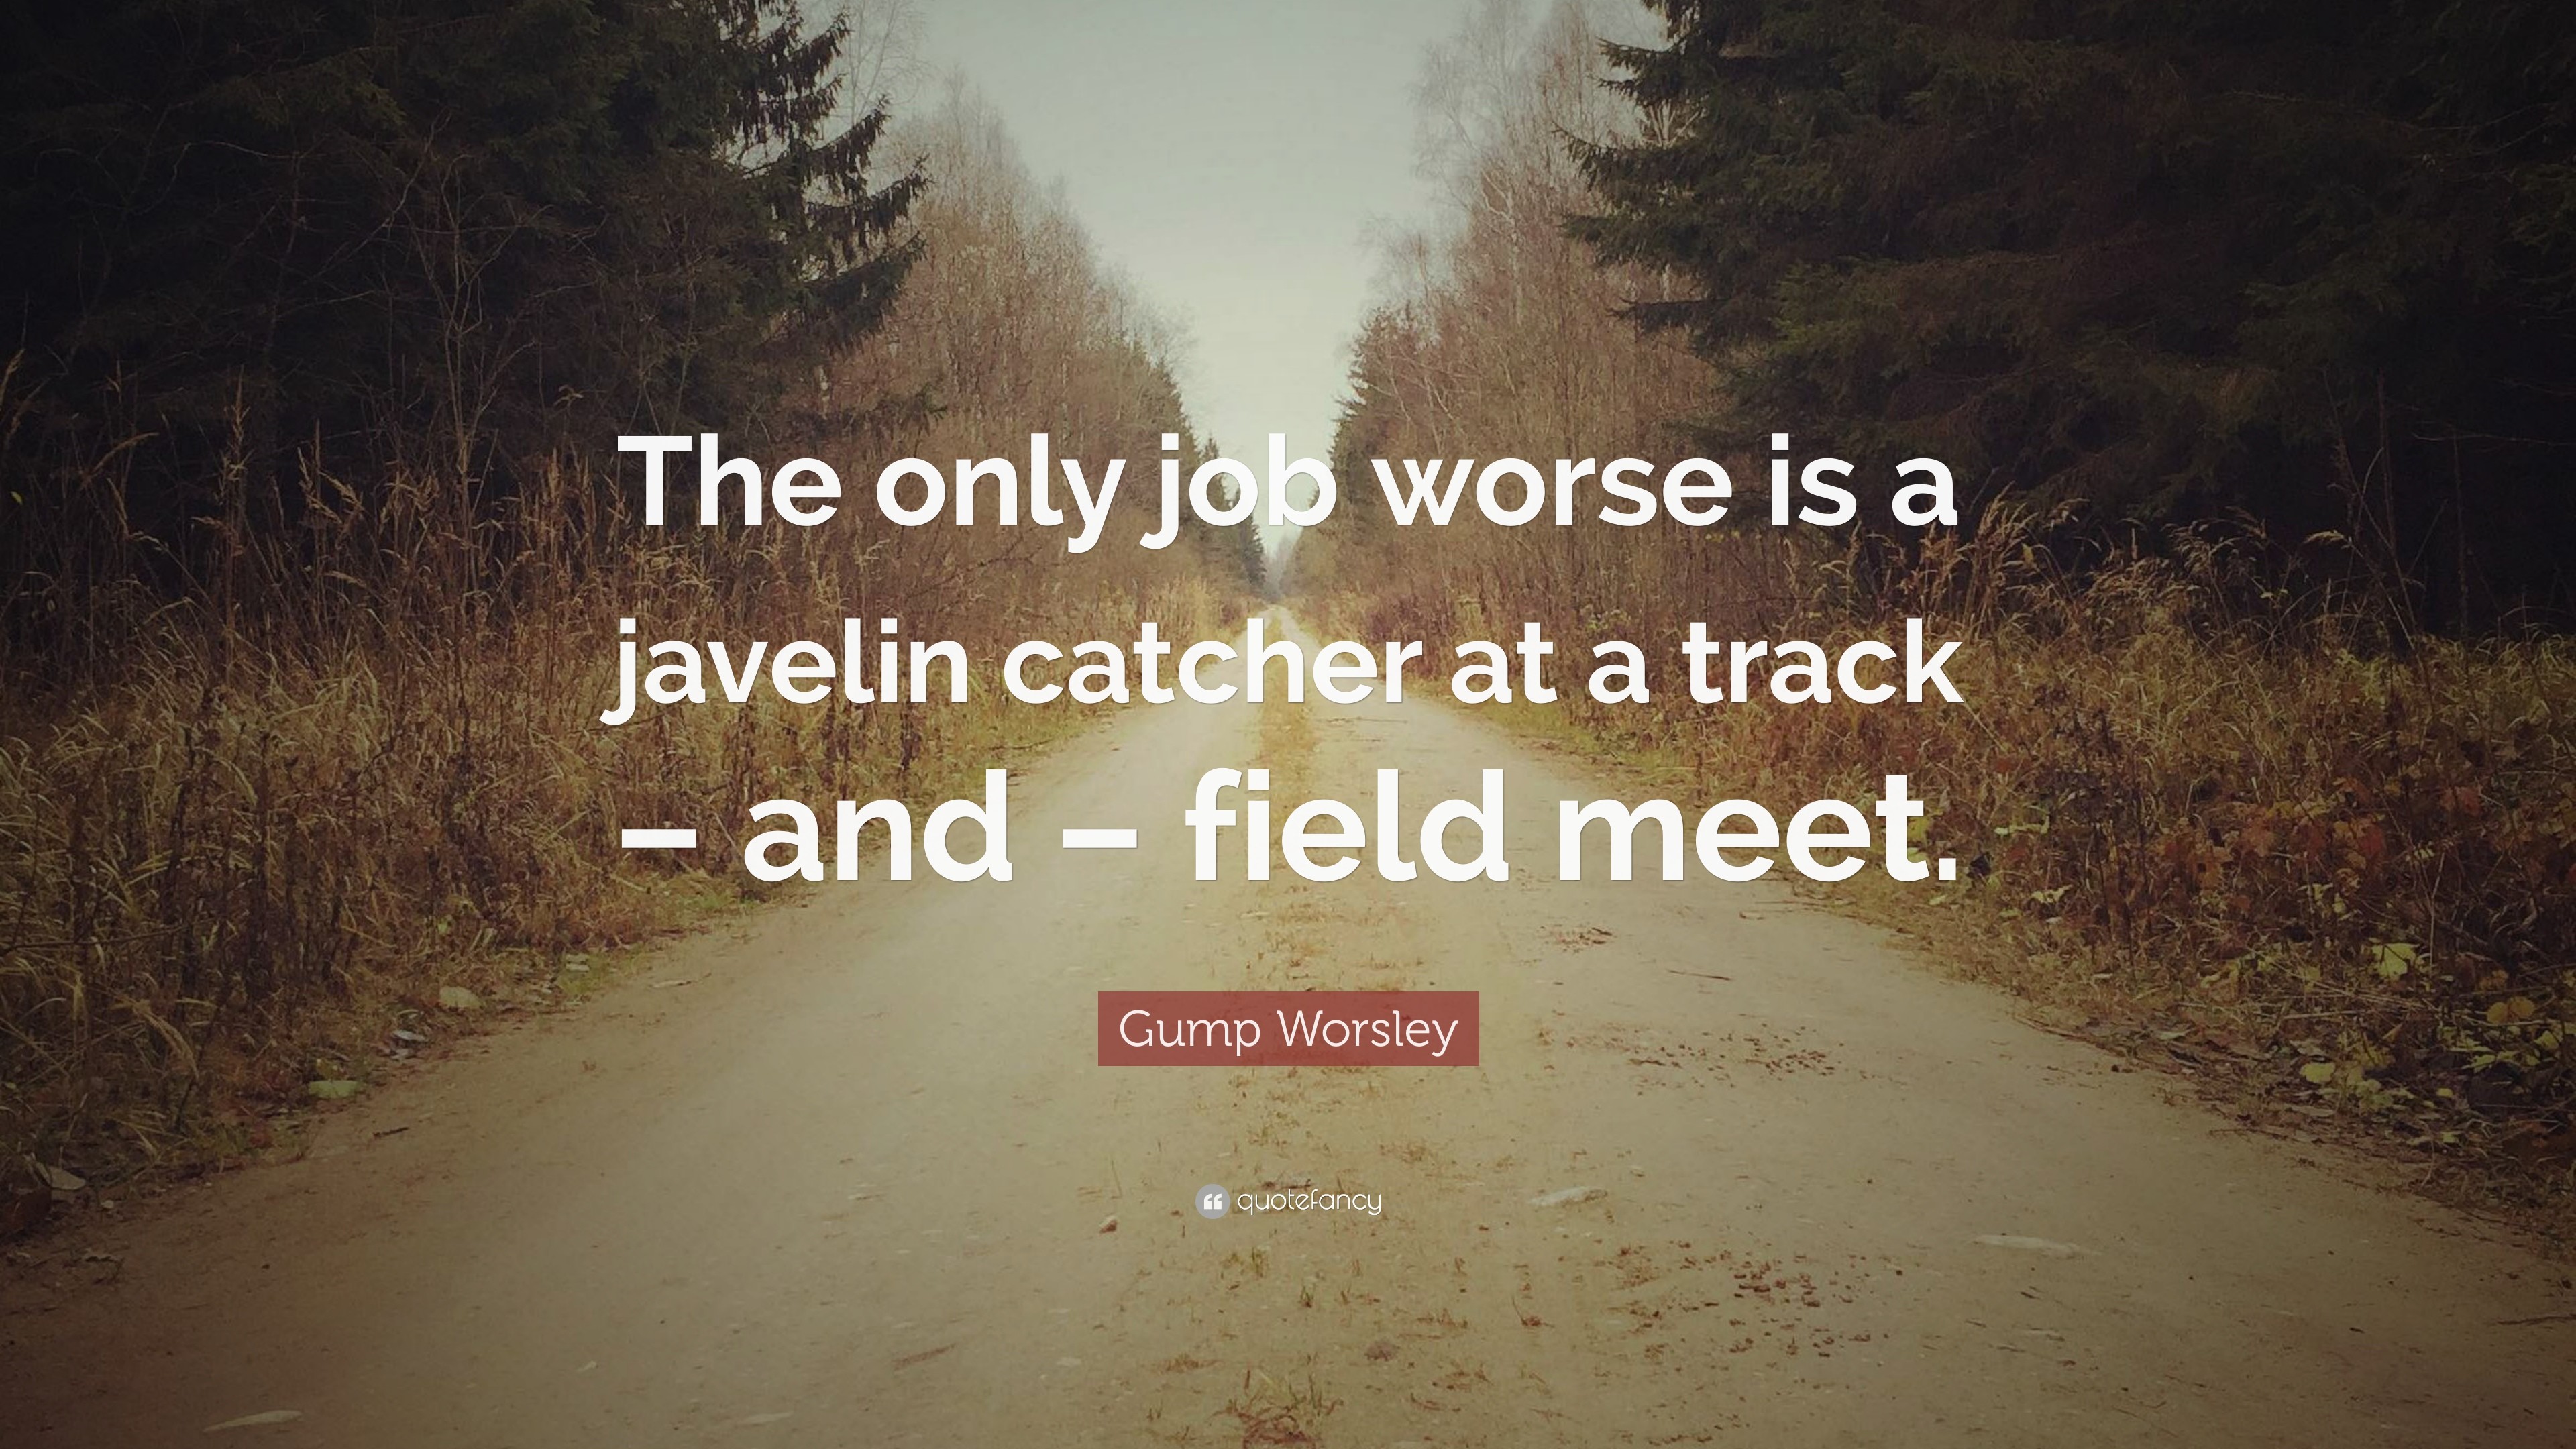 3840x2160 Gump Worsley Quote: “The only job worse is a javelin catcher at a track